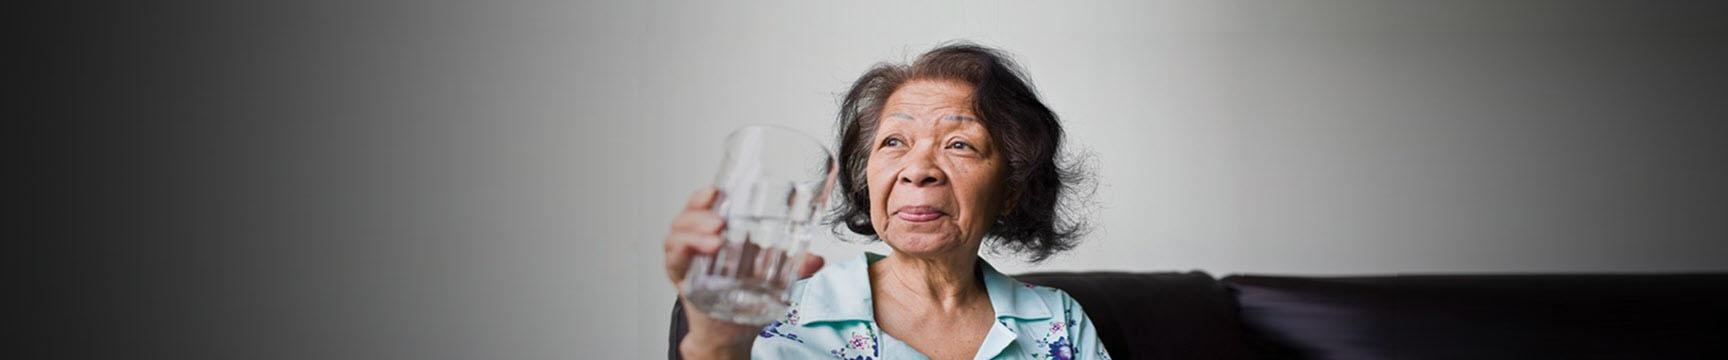 Women drinking a glass of water